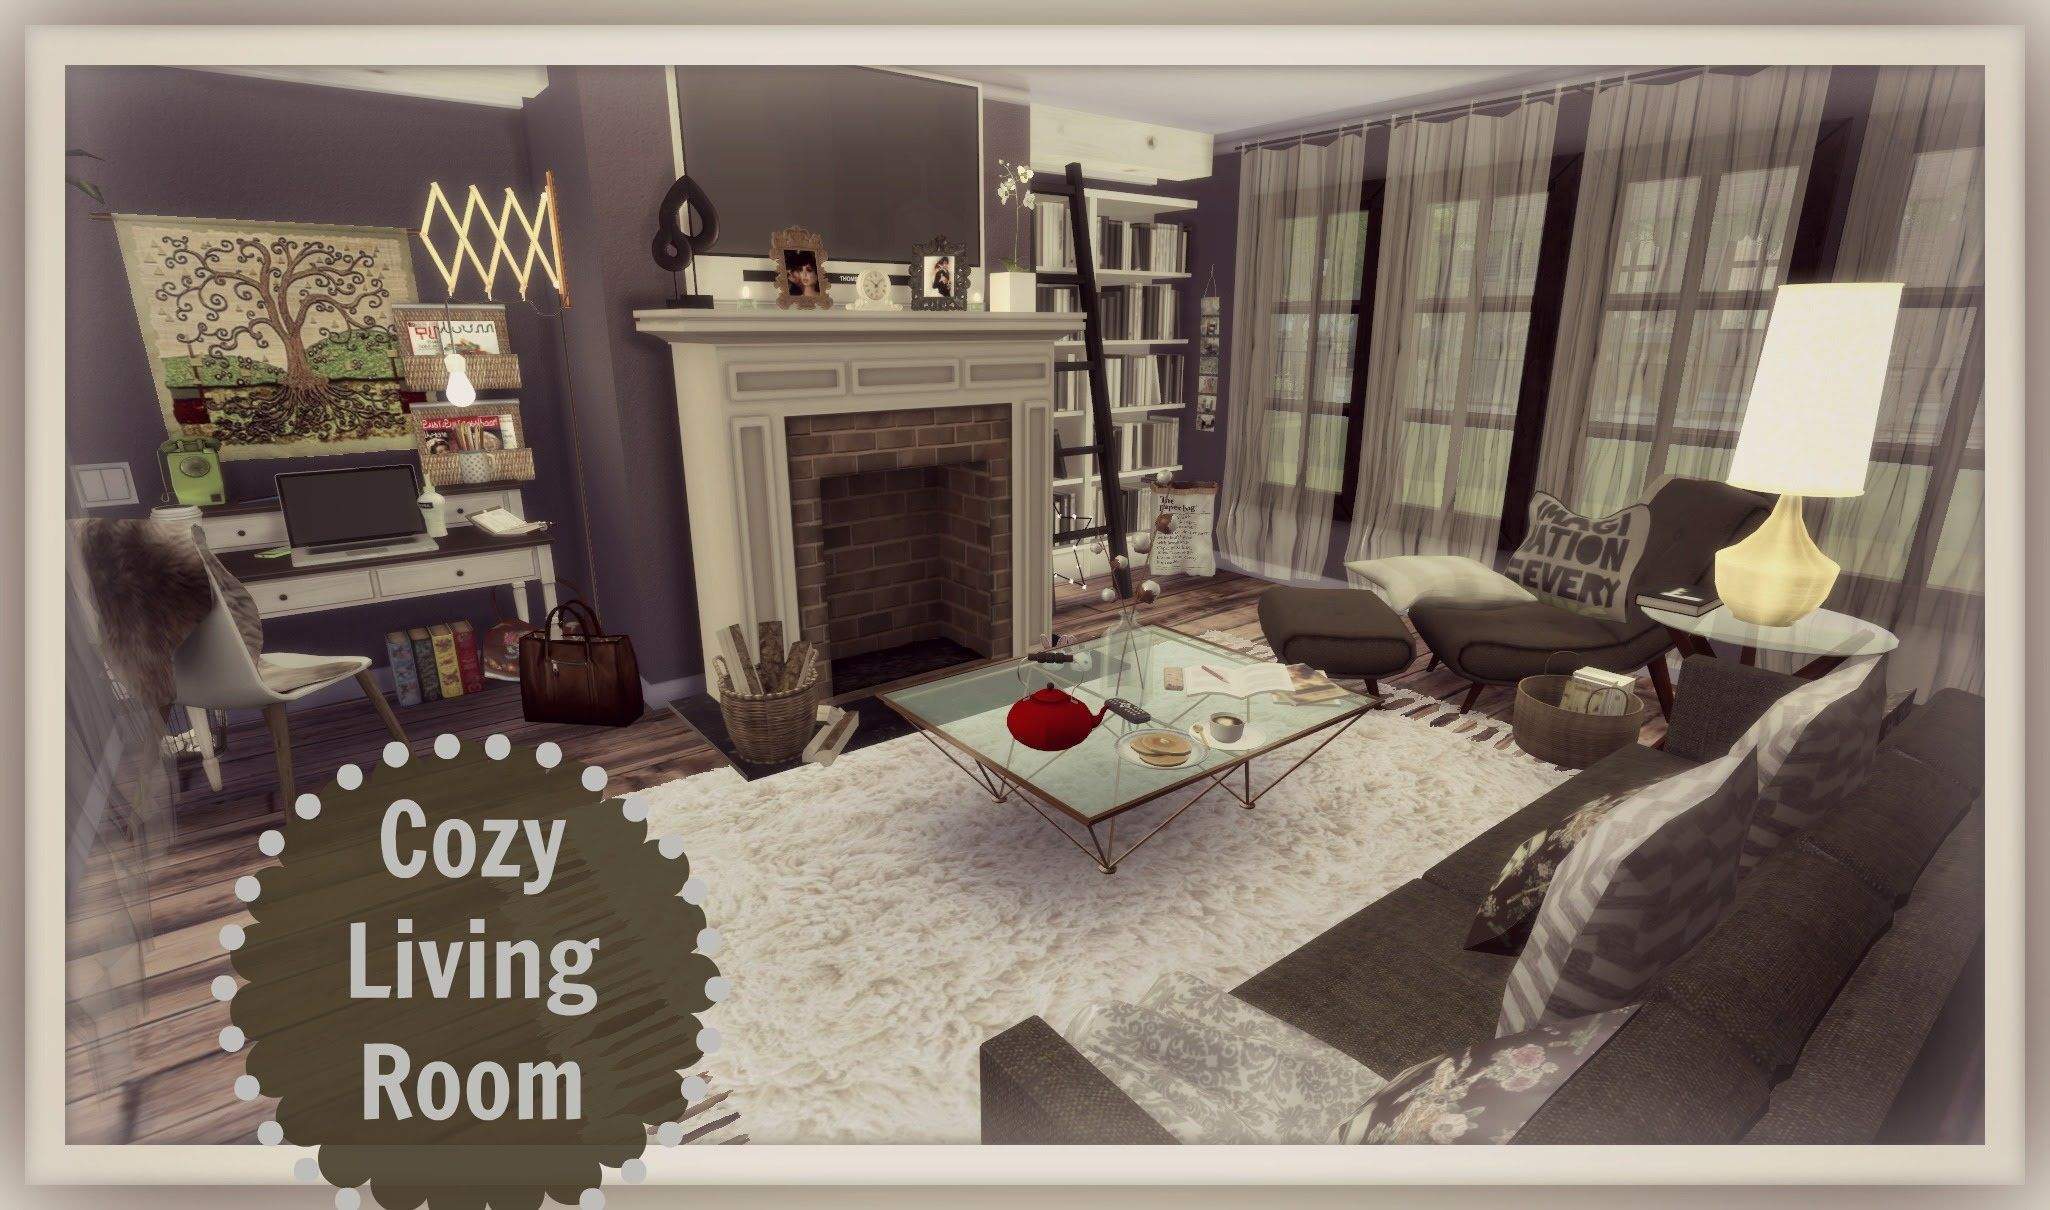 sims 4 wohnzimmer frisch 75 sims 3 living room ideas freshomedaily of sims 4 wohnzimmer